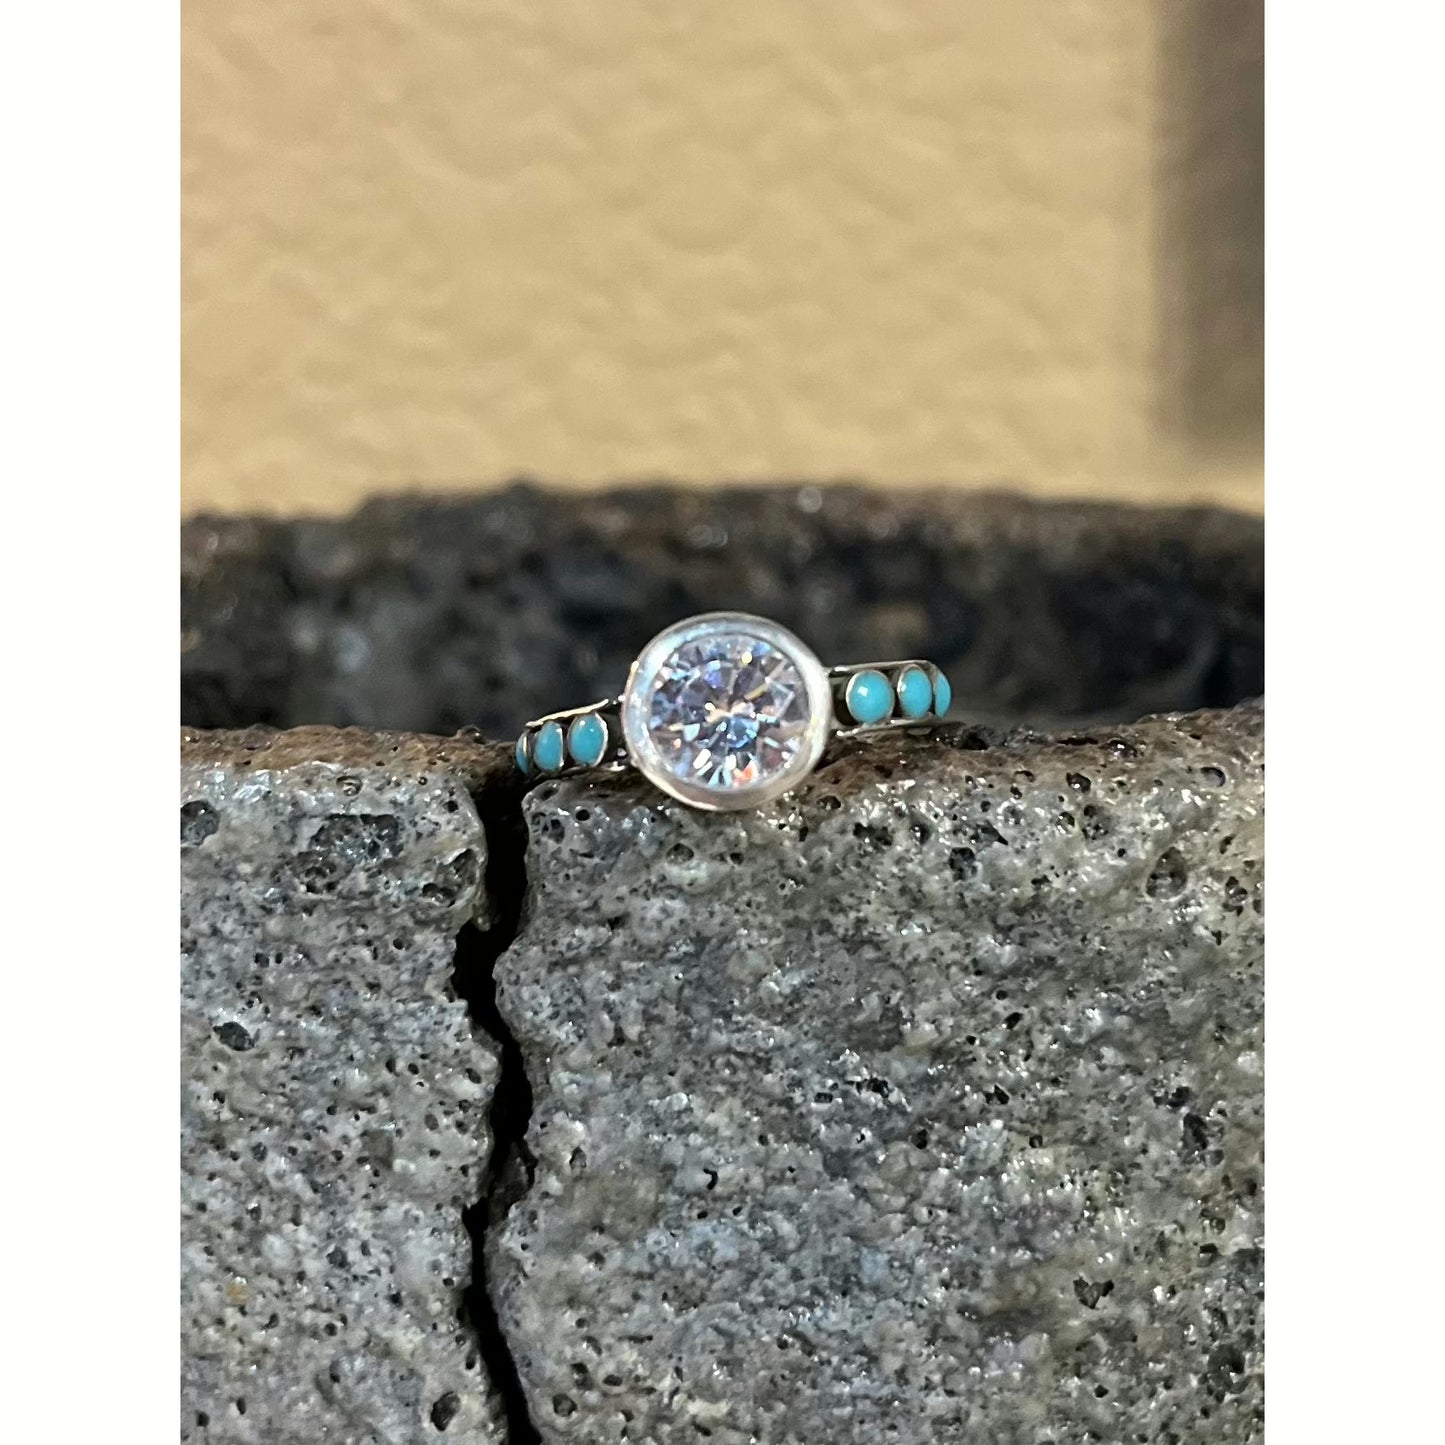 Rockin Out Jewelry’s “Kora” is solid sterling ring that features an elegant 8mm round cz stone in the center accented with 2 settings on each side filled with our turquoise inlay.